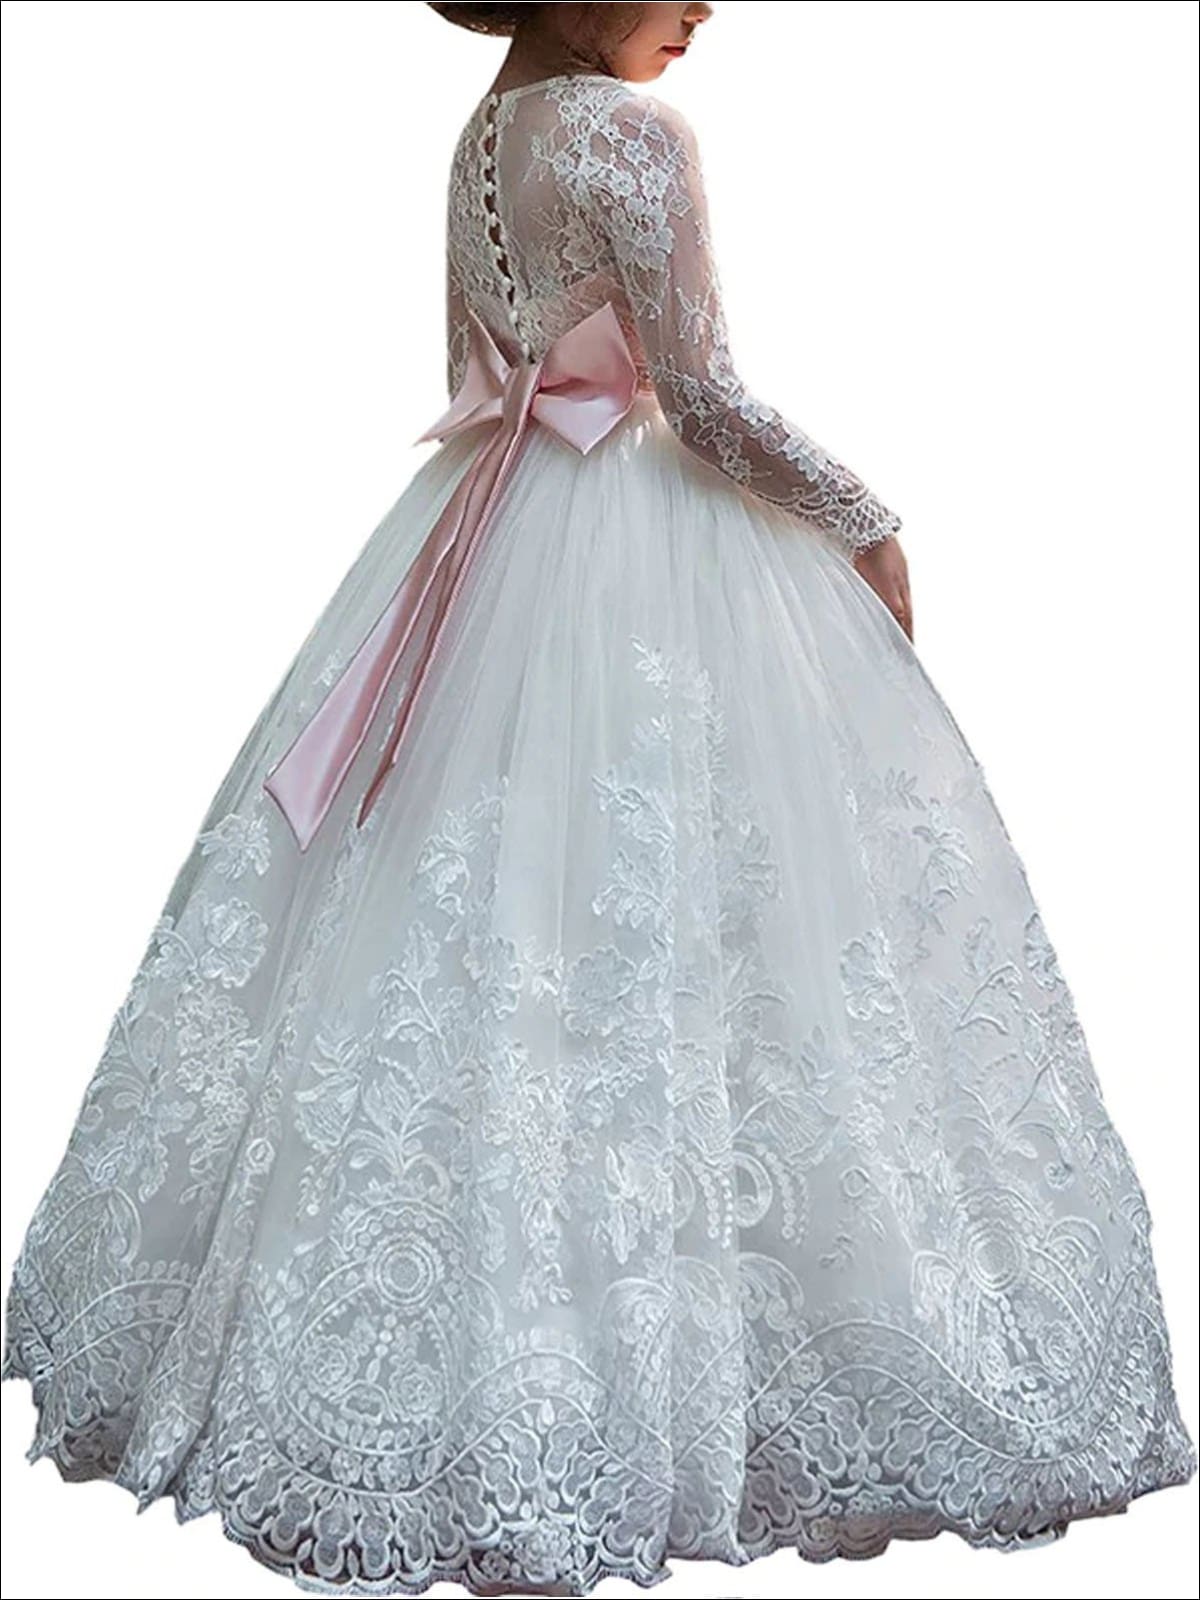 Girls Pink Bow Embellished White Communion Gown - Girls Gowns